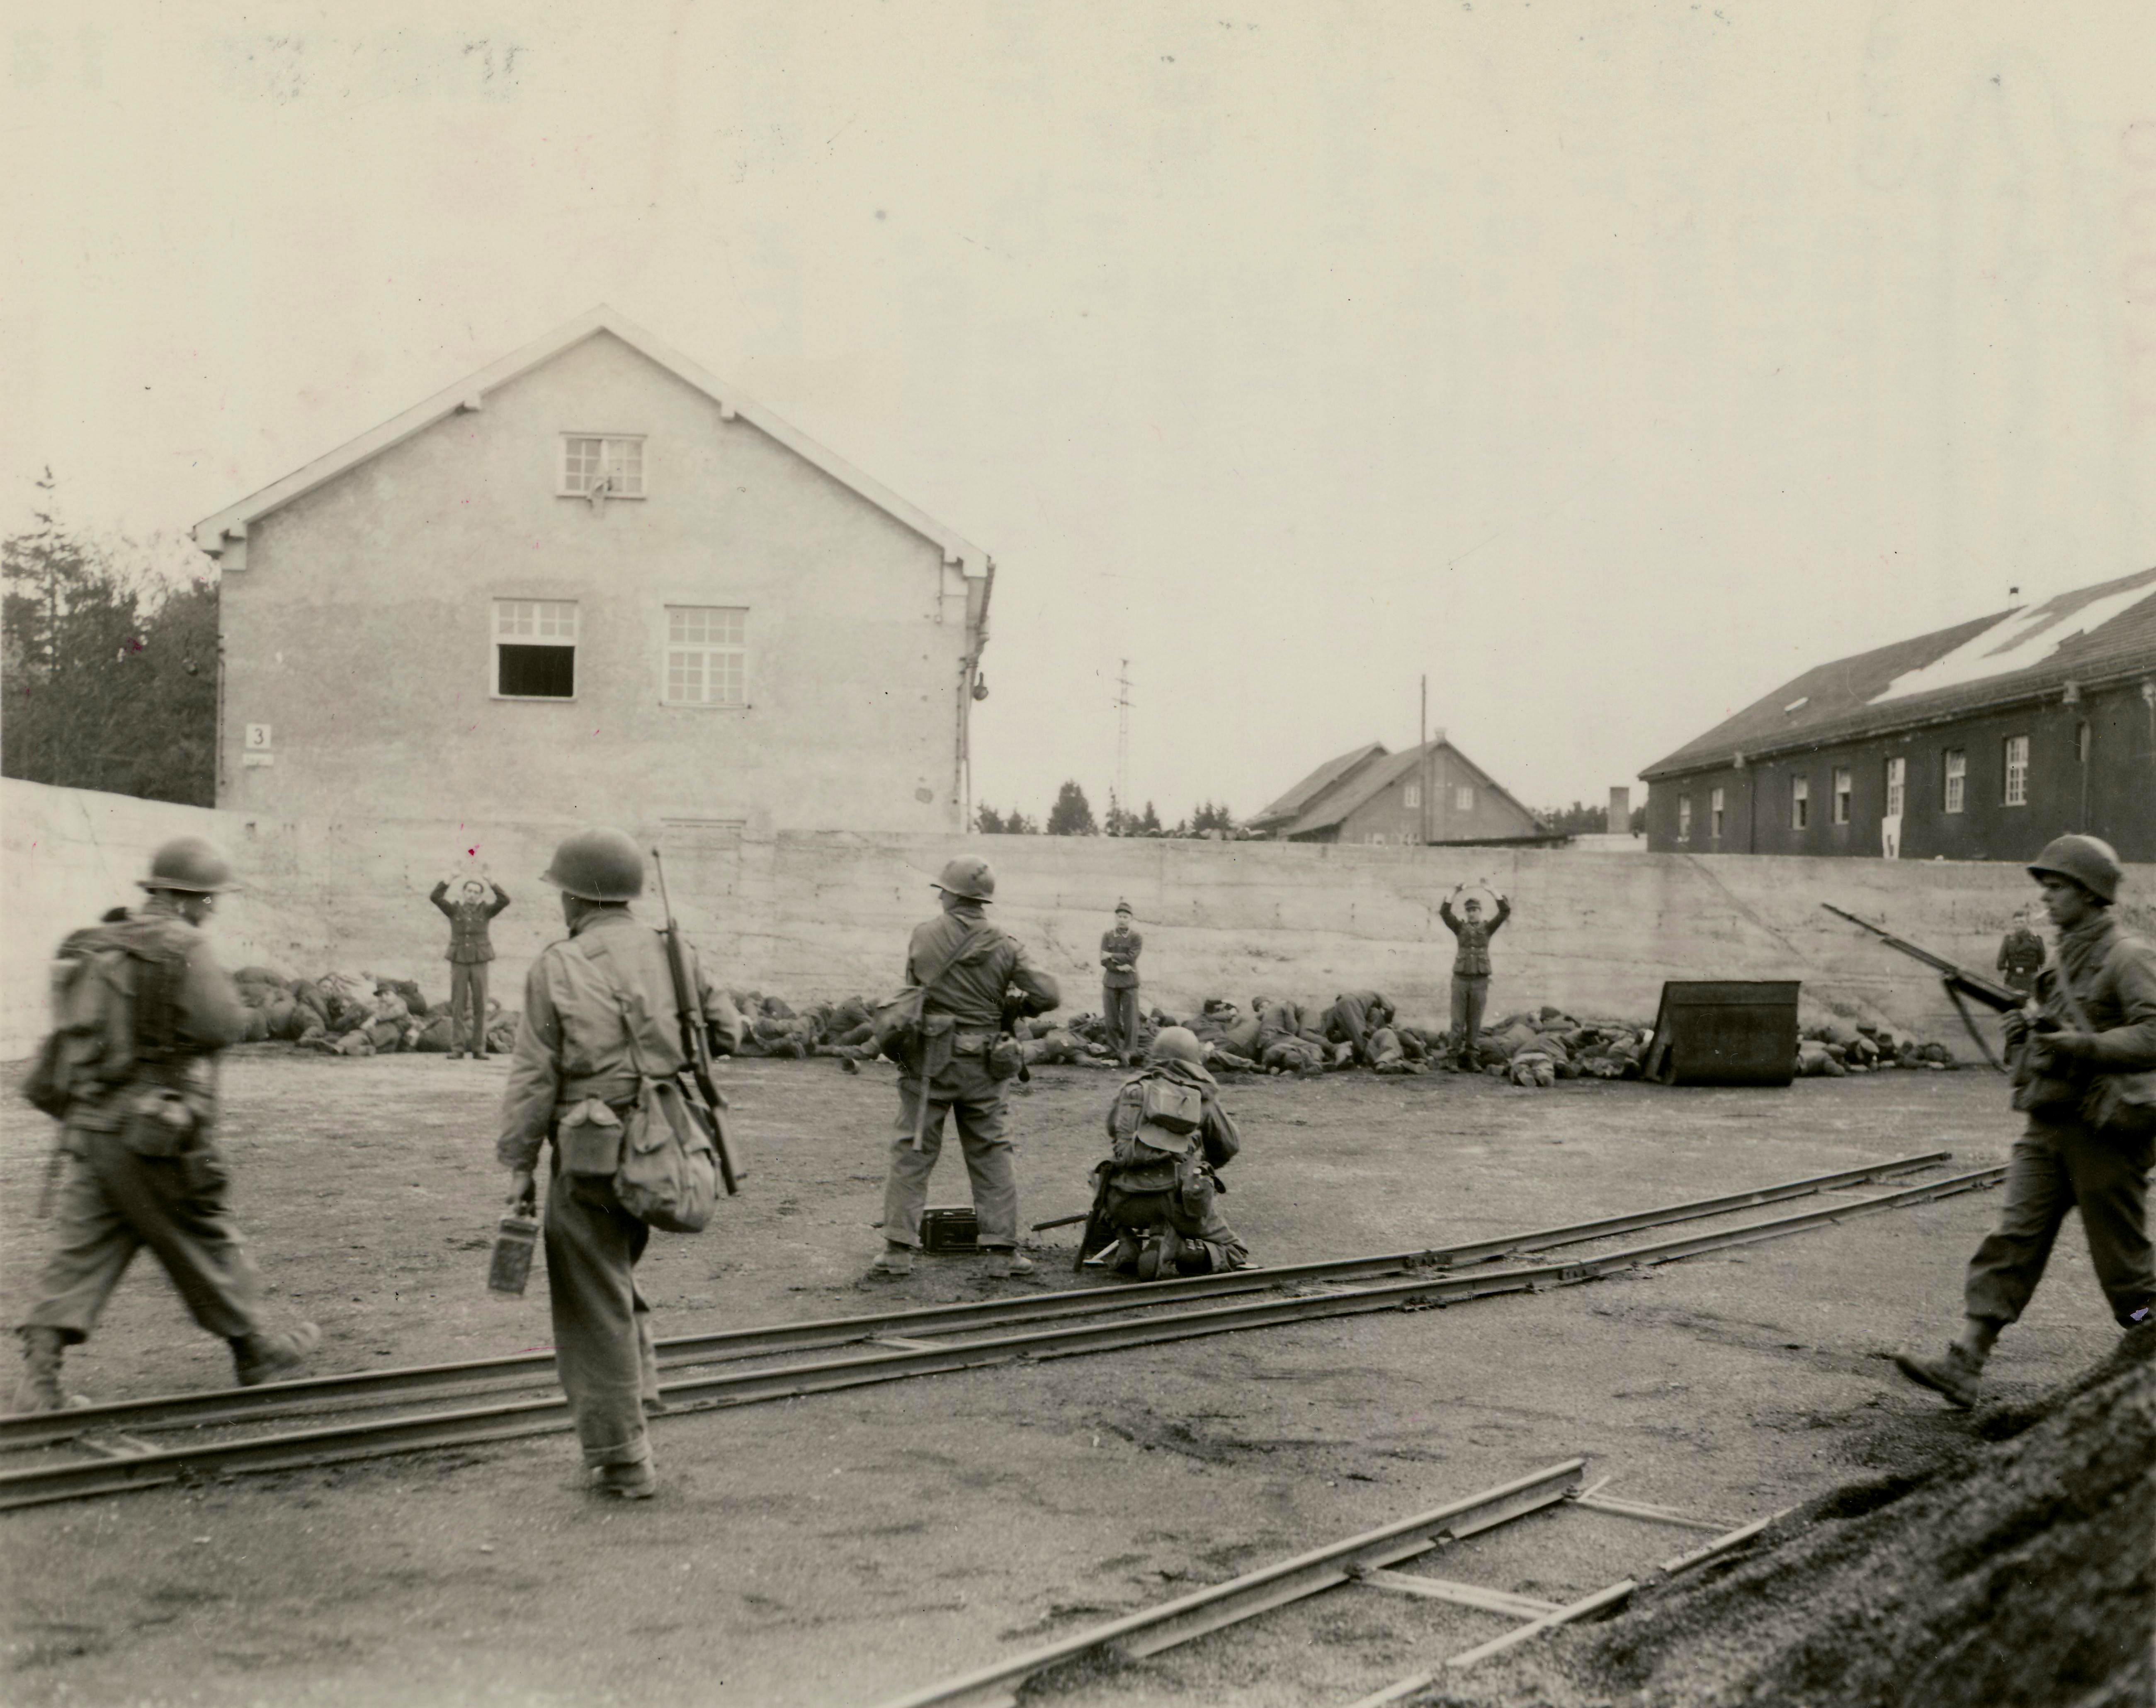 US Army troops executing German SS guards at Dachau Concentration Camp, Germany, 29 Apr 1945